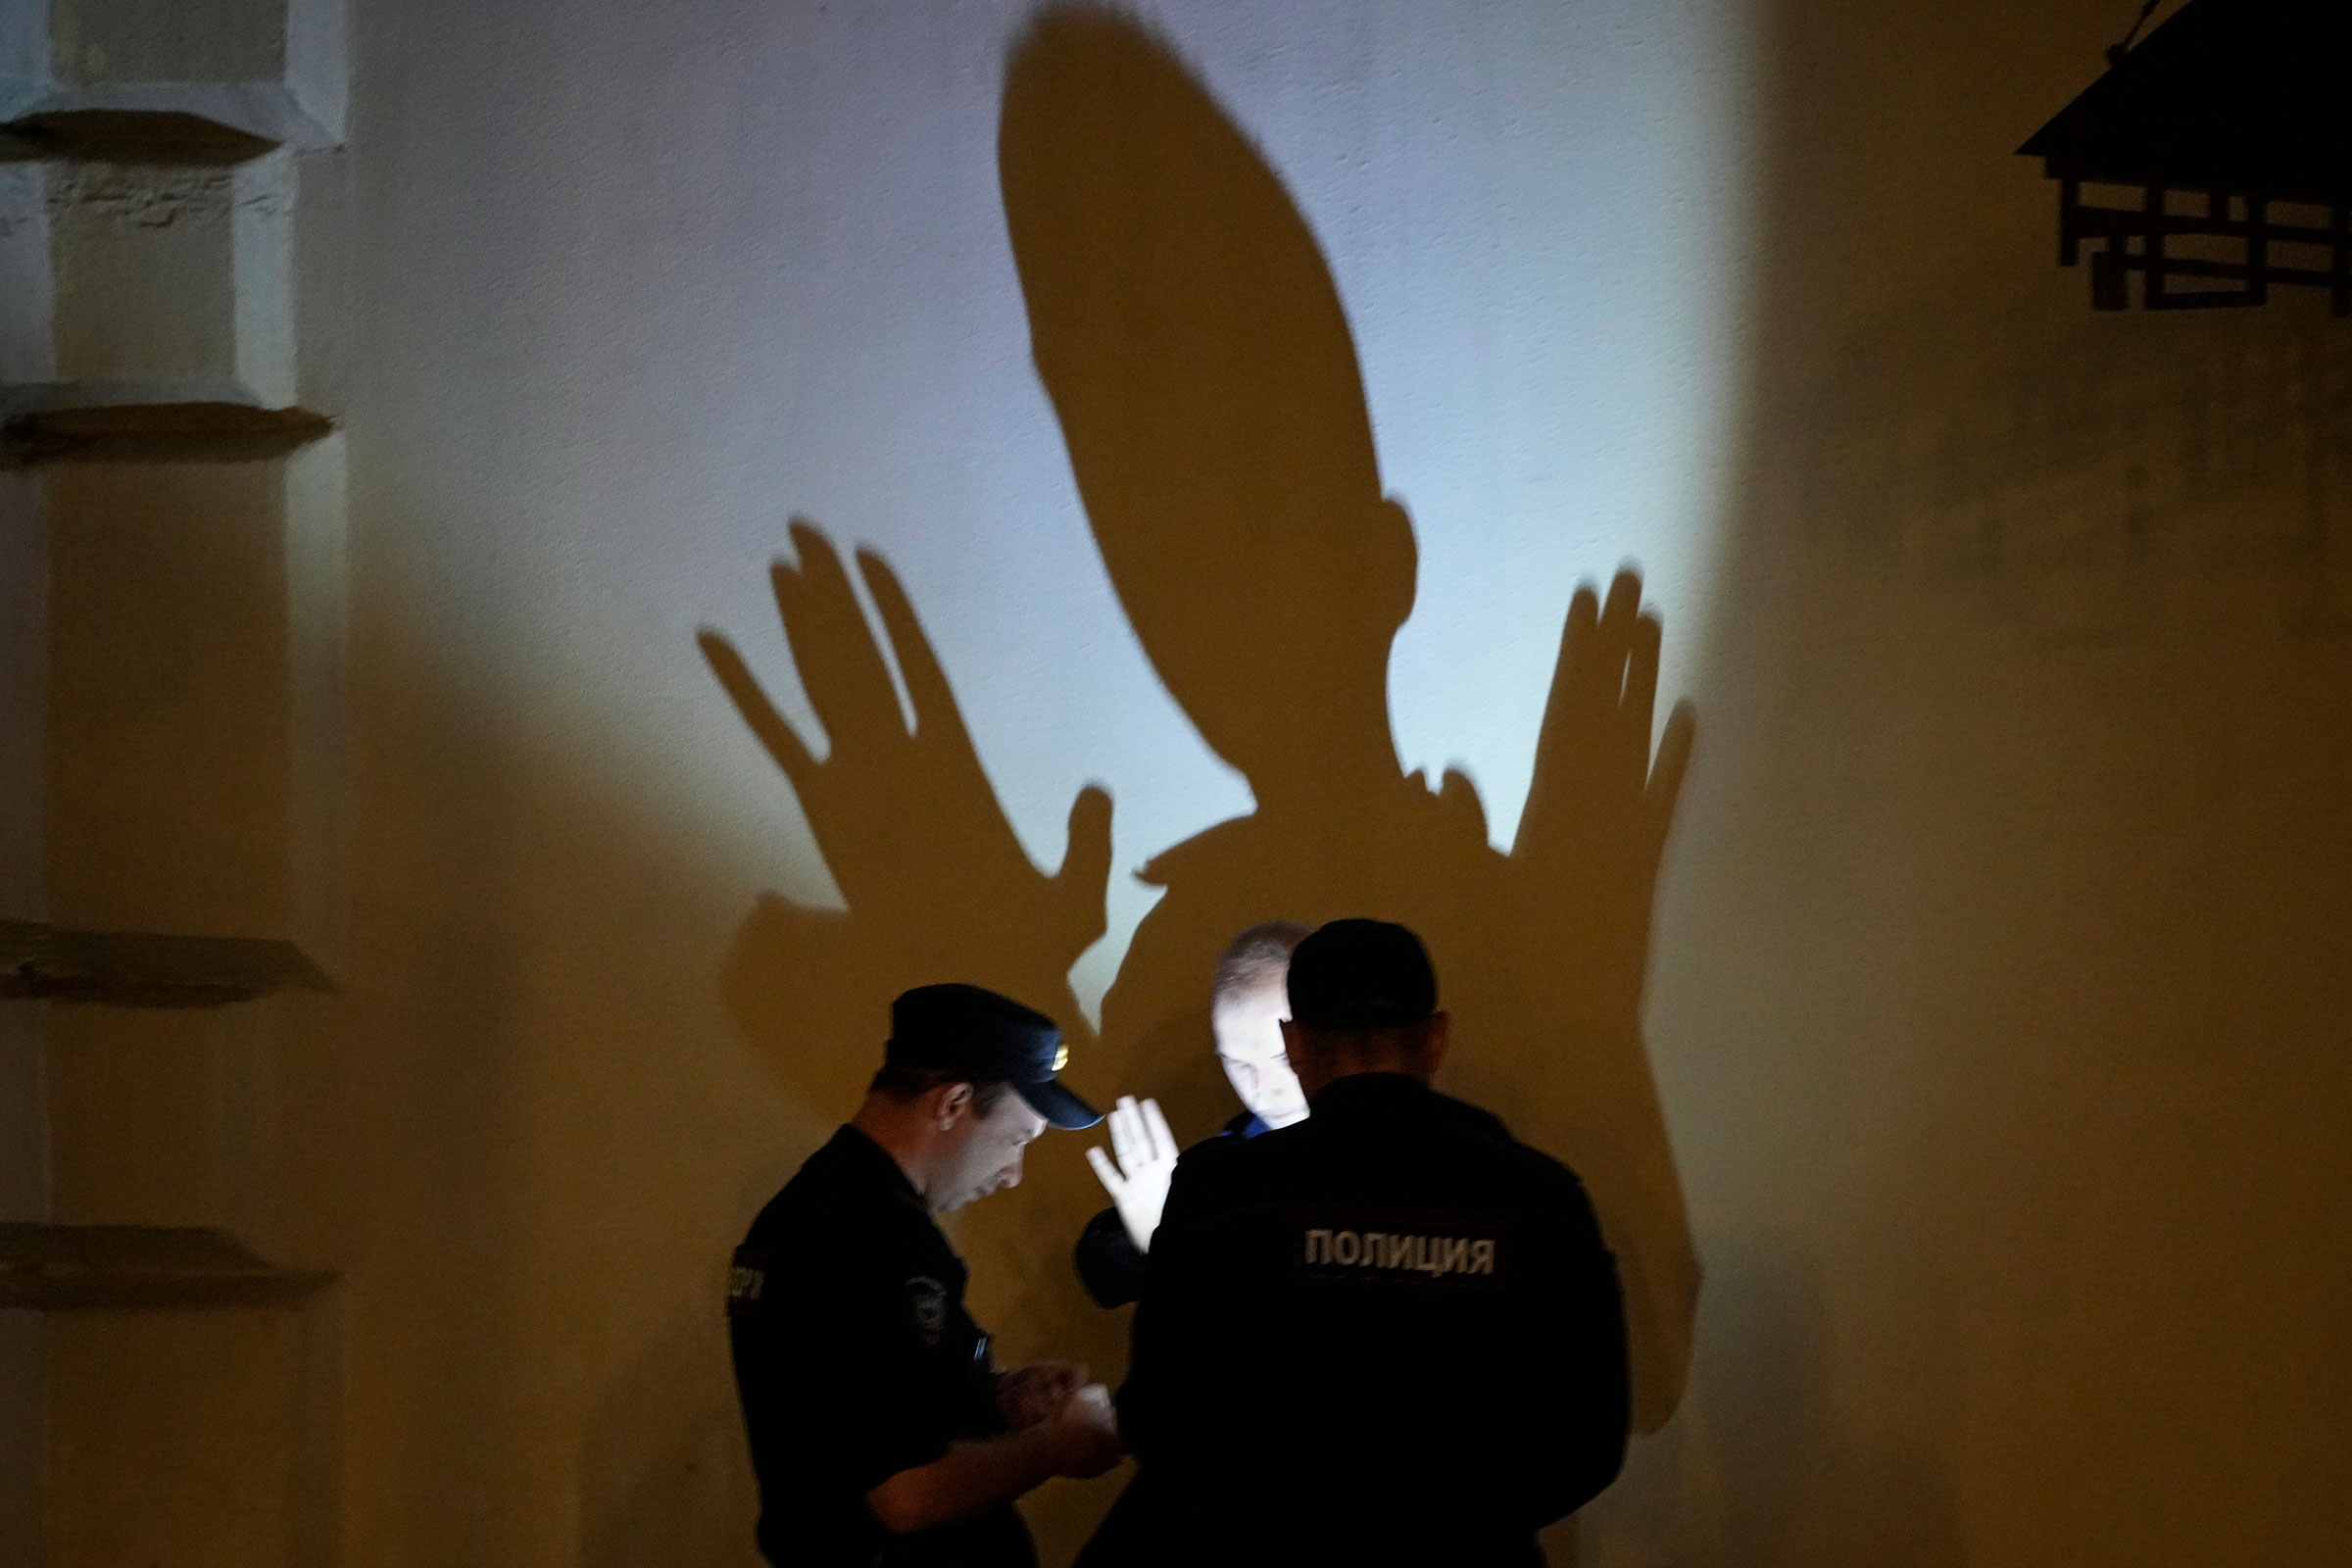 Police officers check documents of a man in central Moscow, Russia, on June 25.